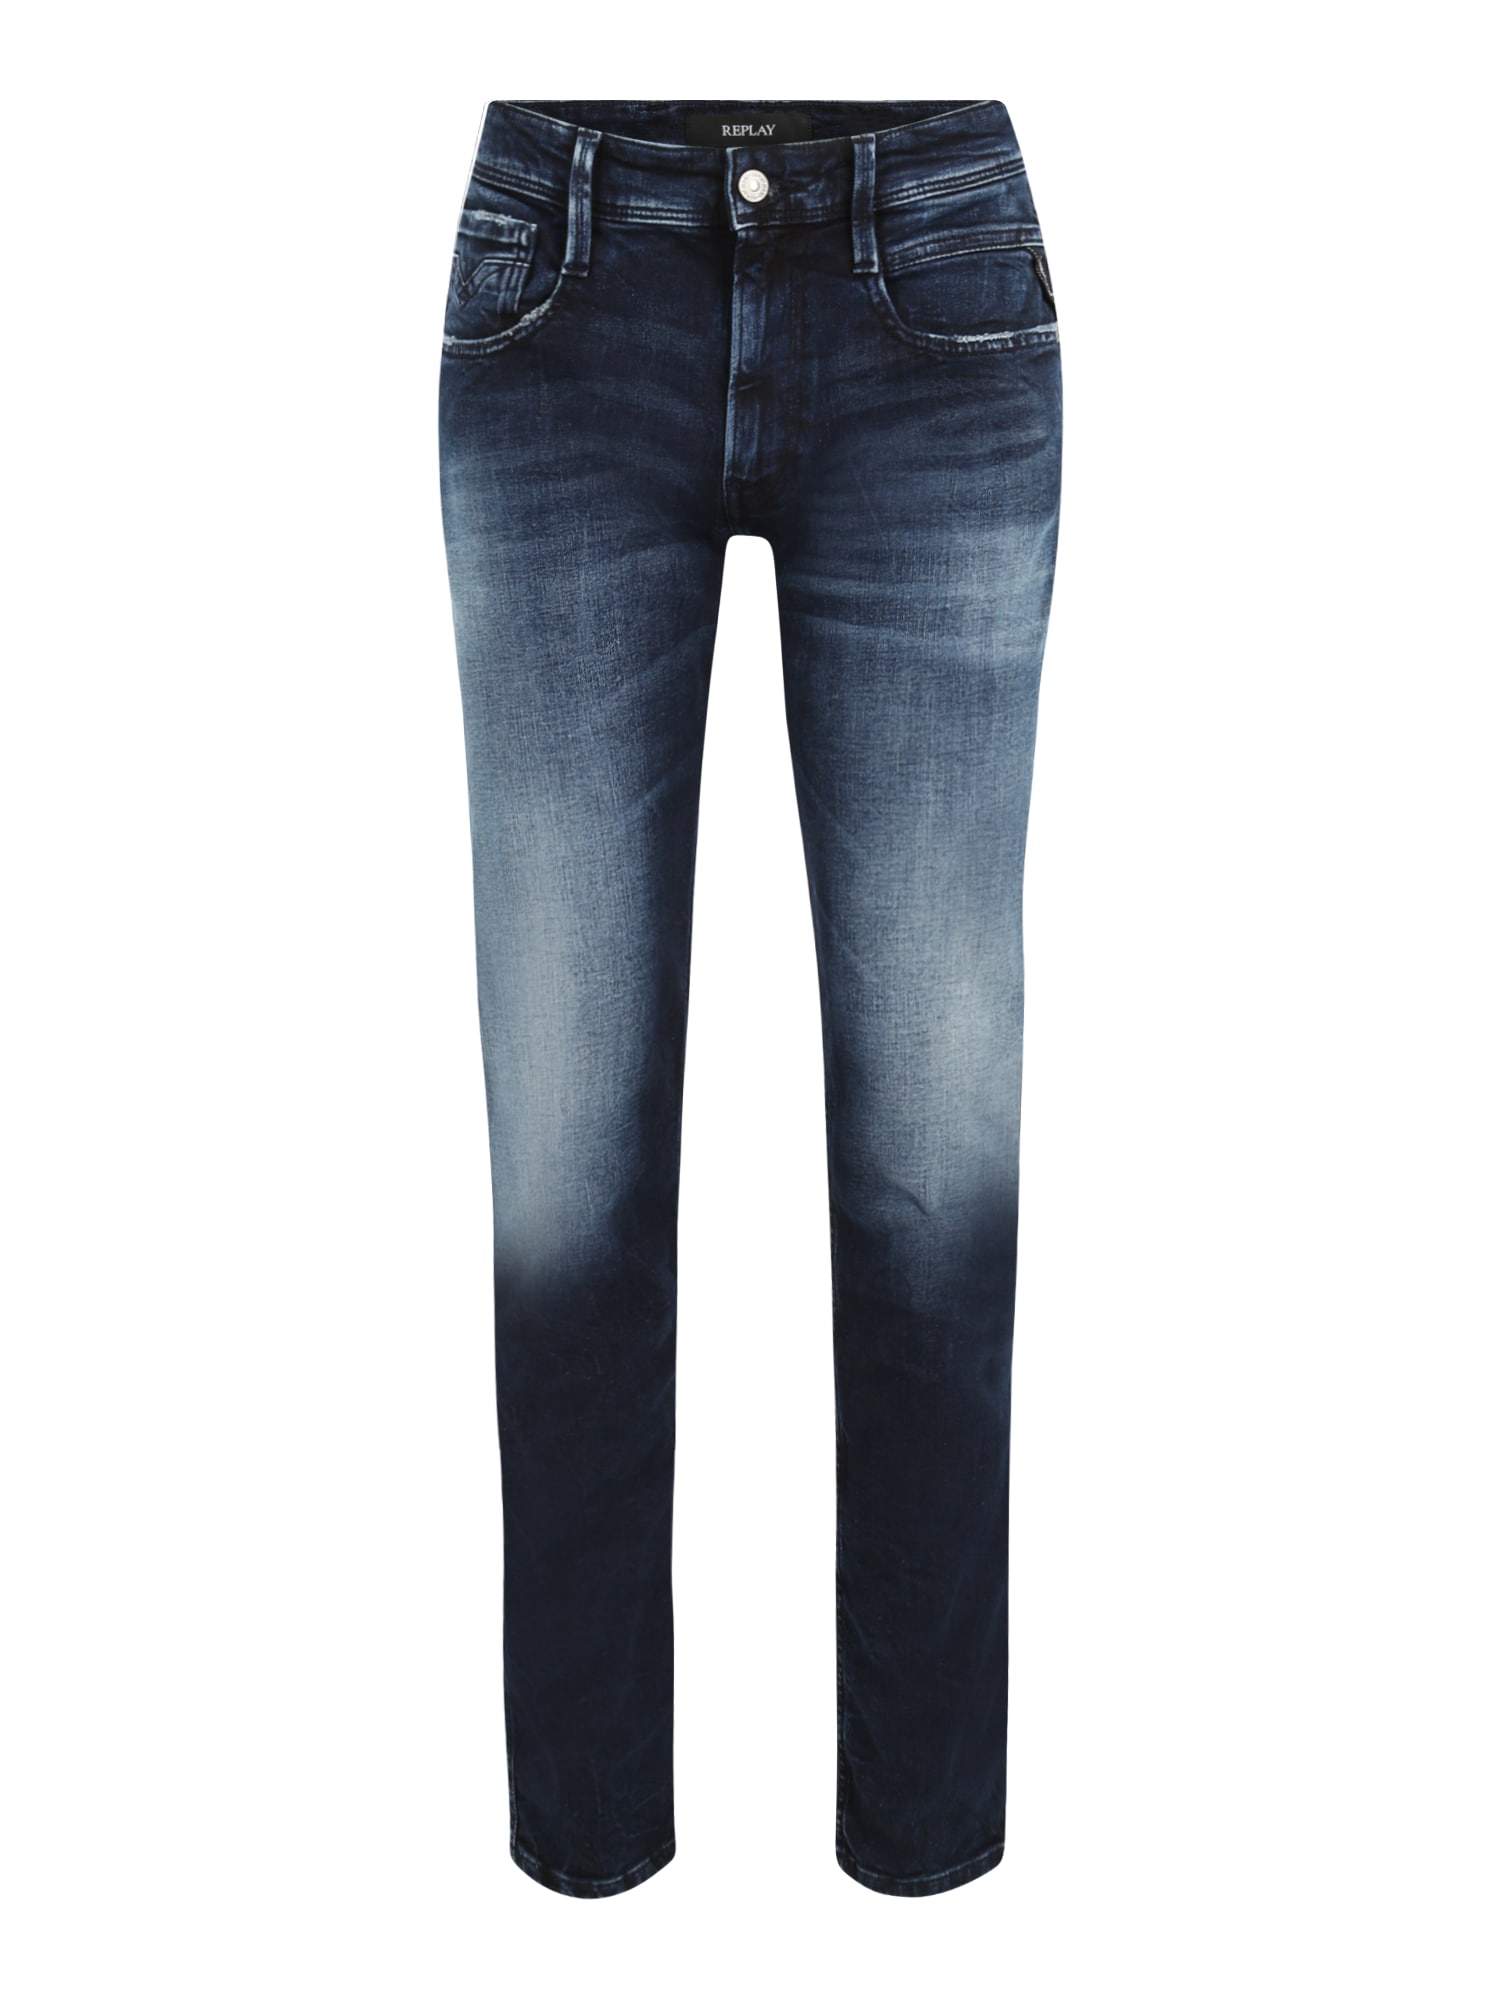 Replay REPLAY Jeans 'ANBASS' dunkelblau